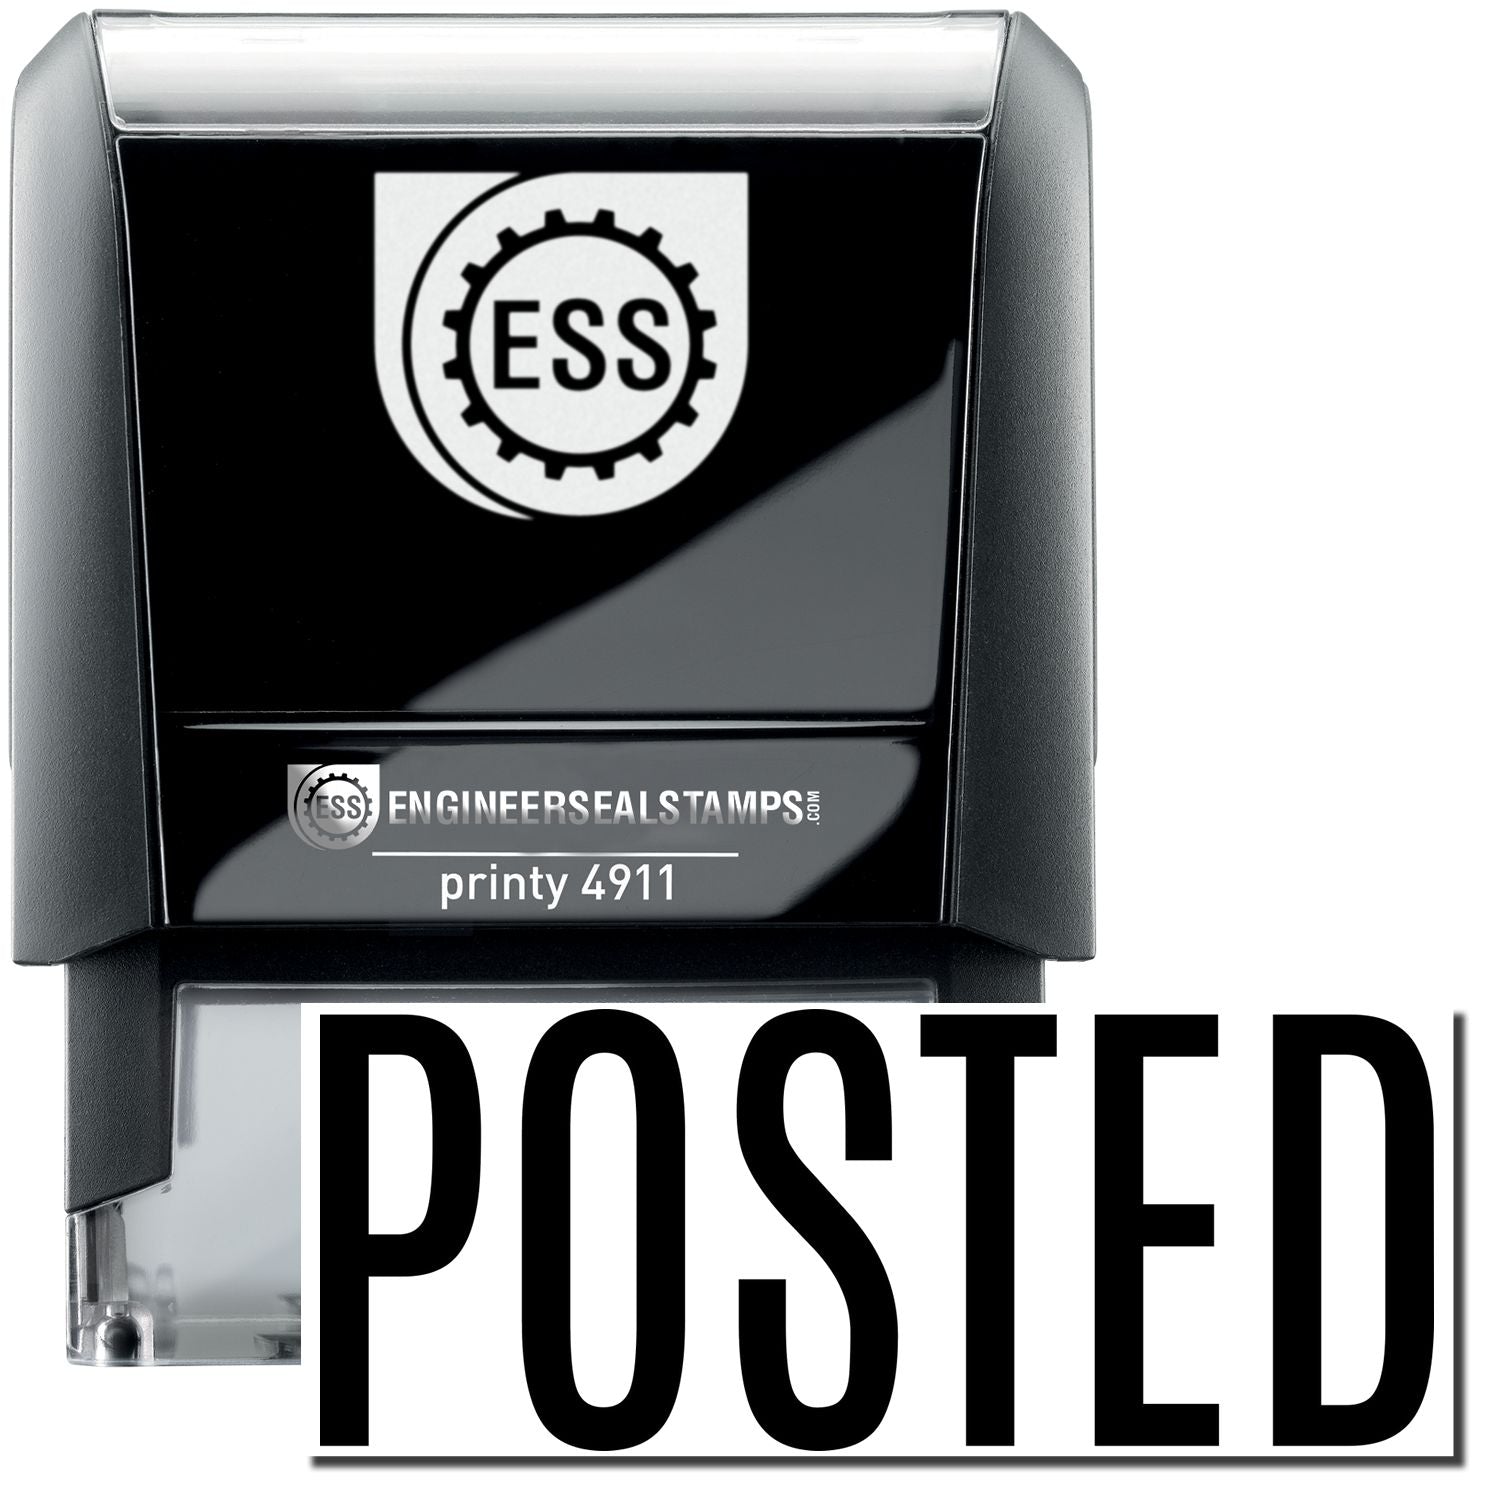 A self-inking stamp with a stamped image showing how the text "POSTED" in a narrow font is displayed after stamping.